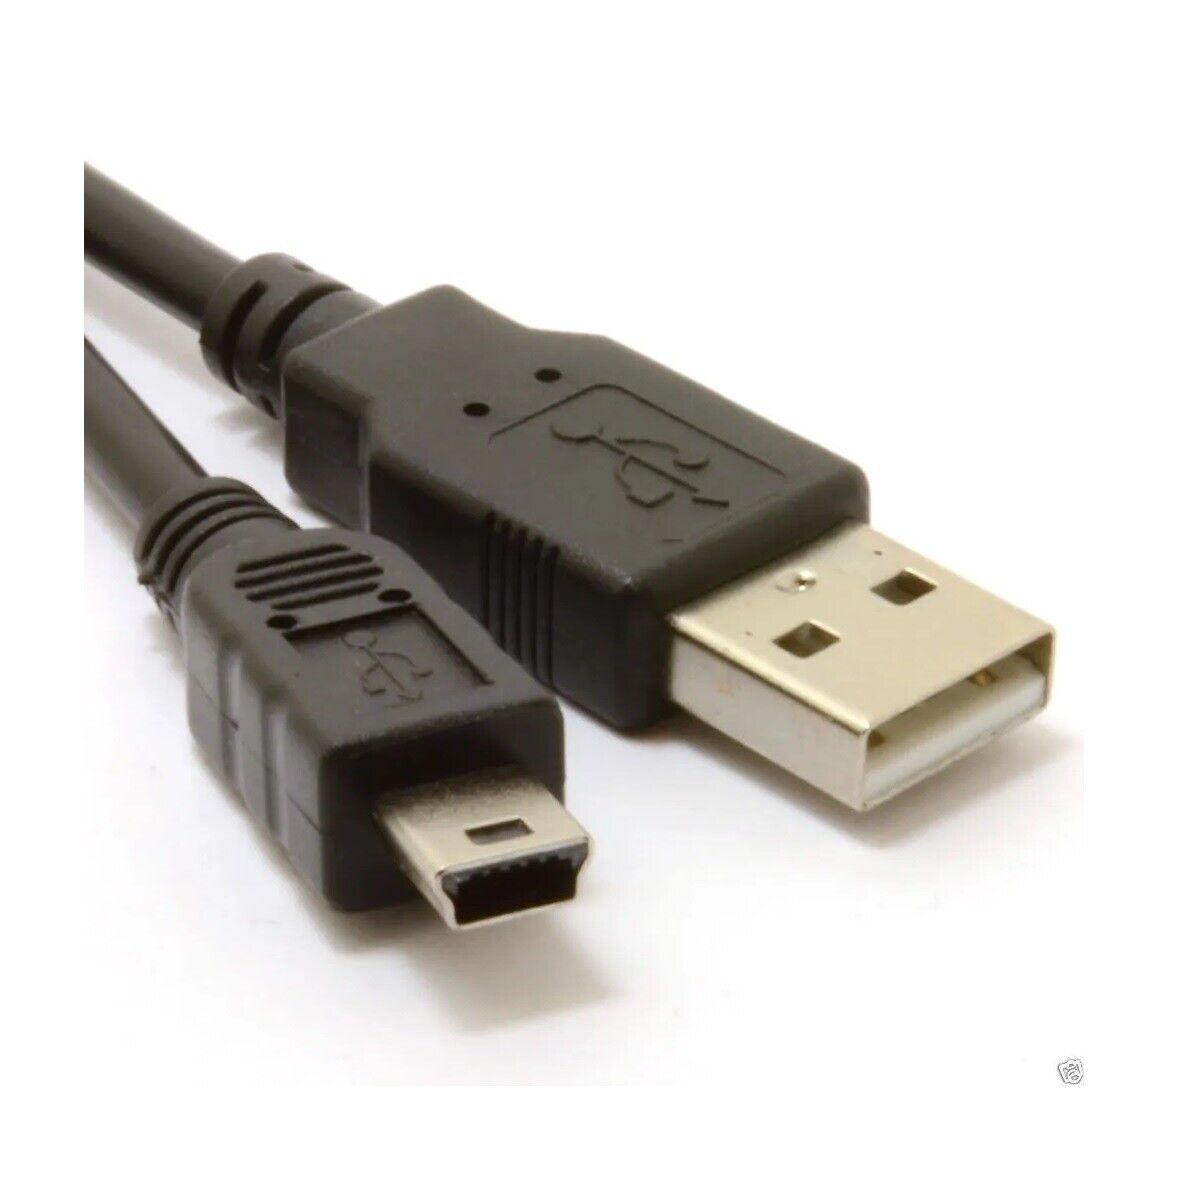 USB 2 Hi Speed cable